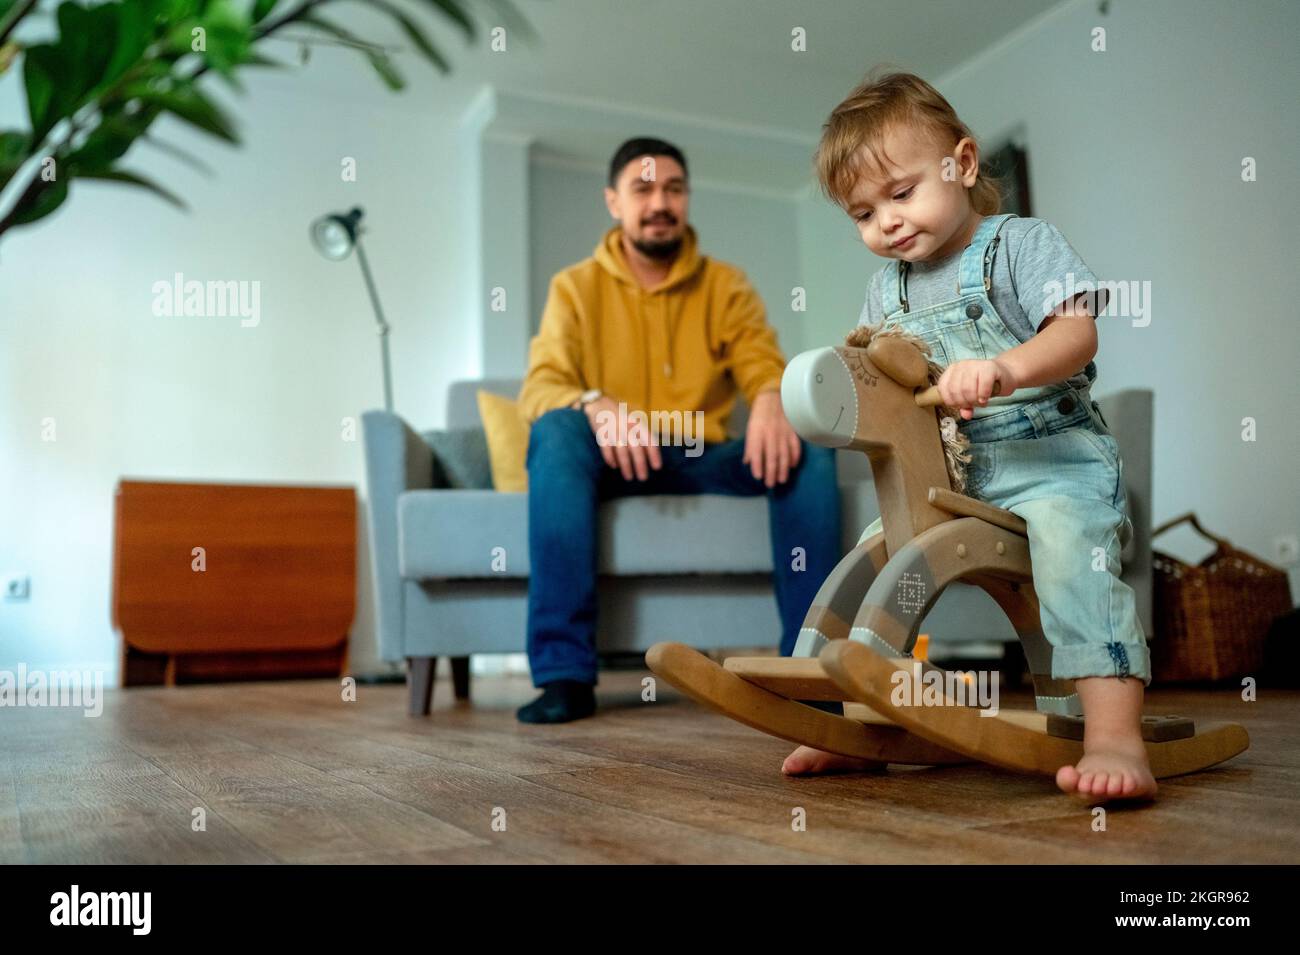 Cute boy playing on rocking horse with father in background Stock Photo